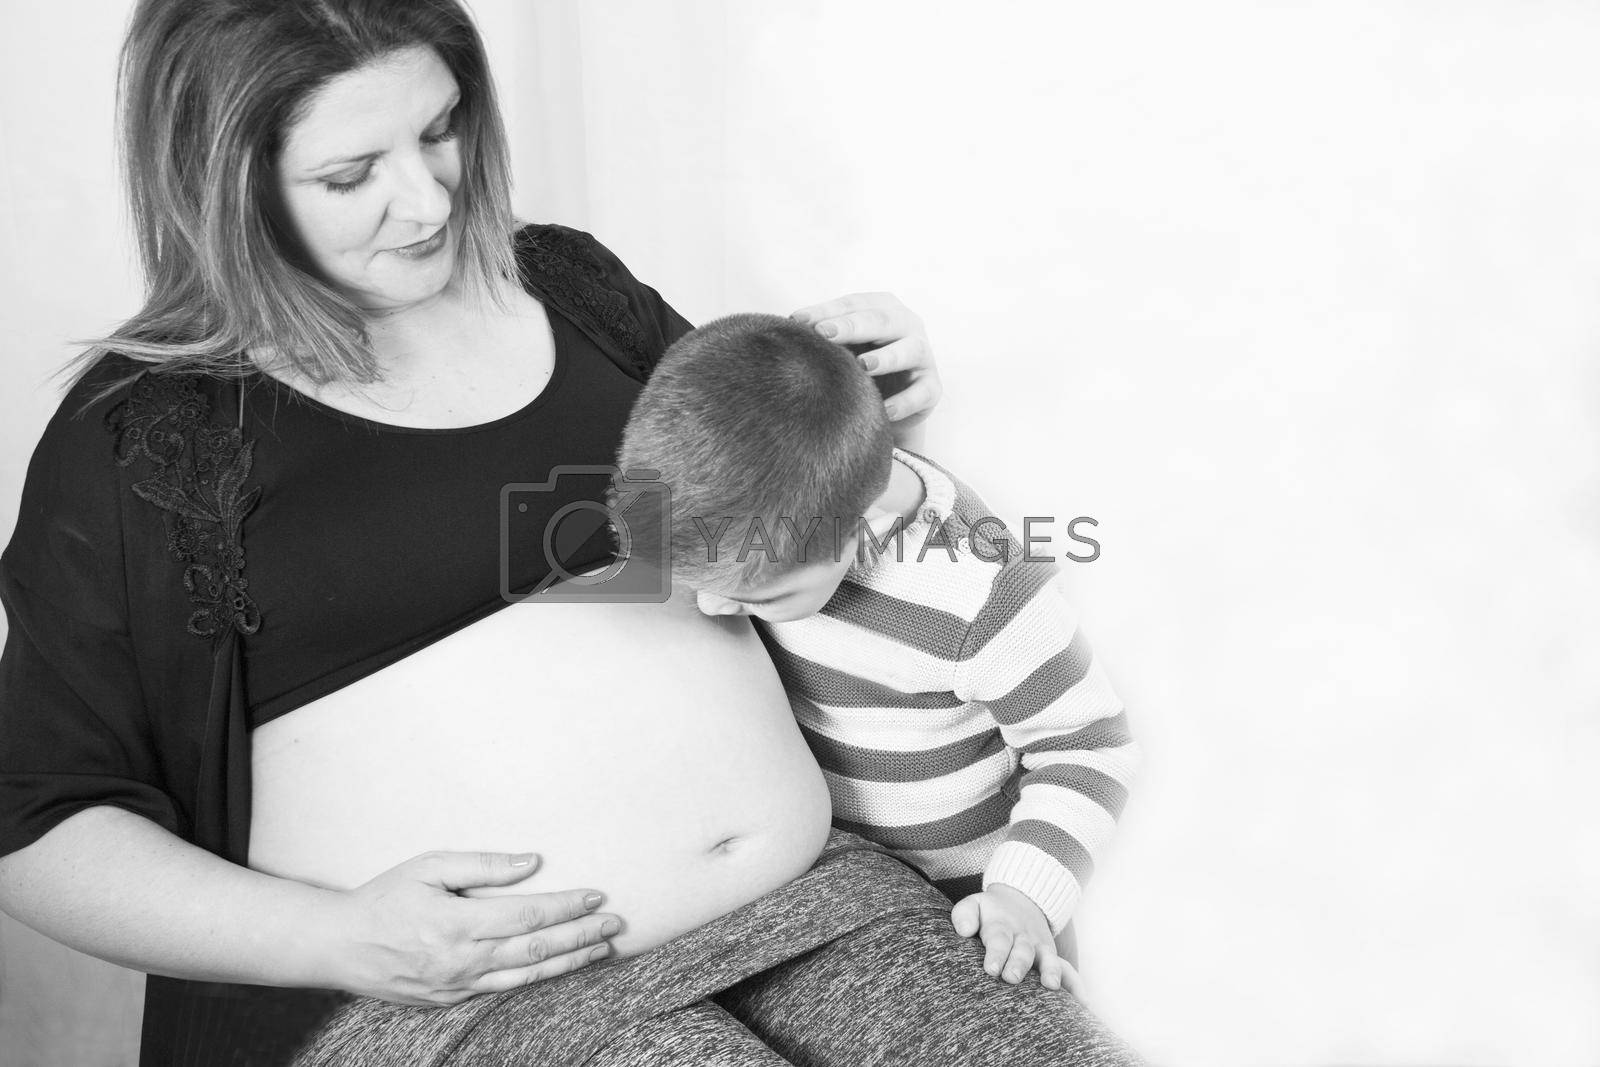 Eight month pregnant woman and three year old son kissing belly. Smiling